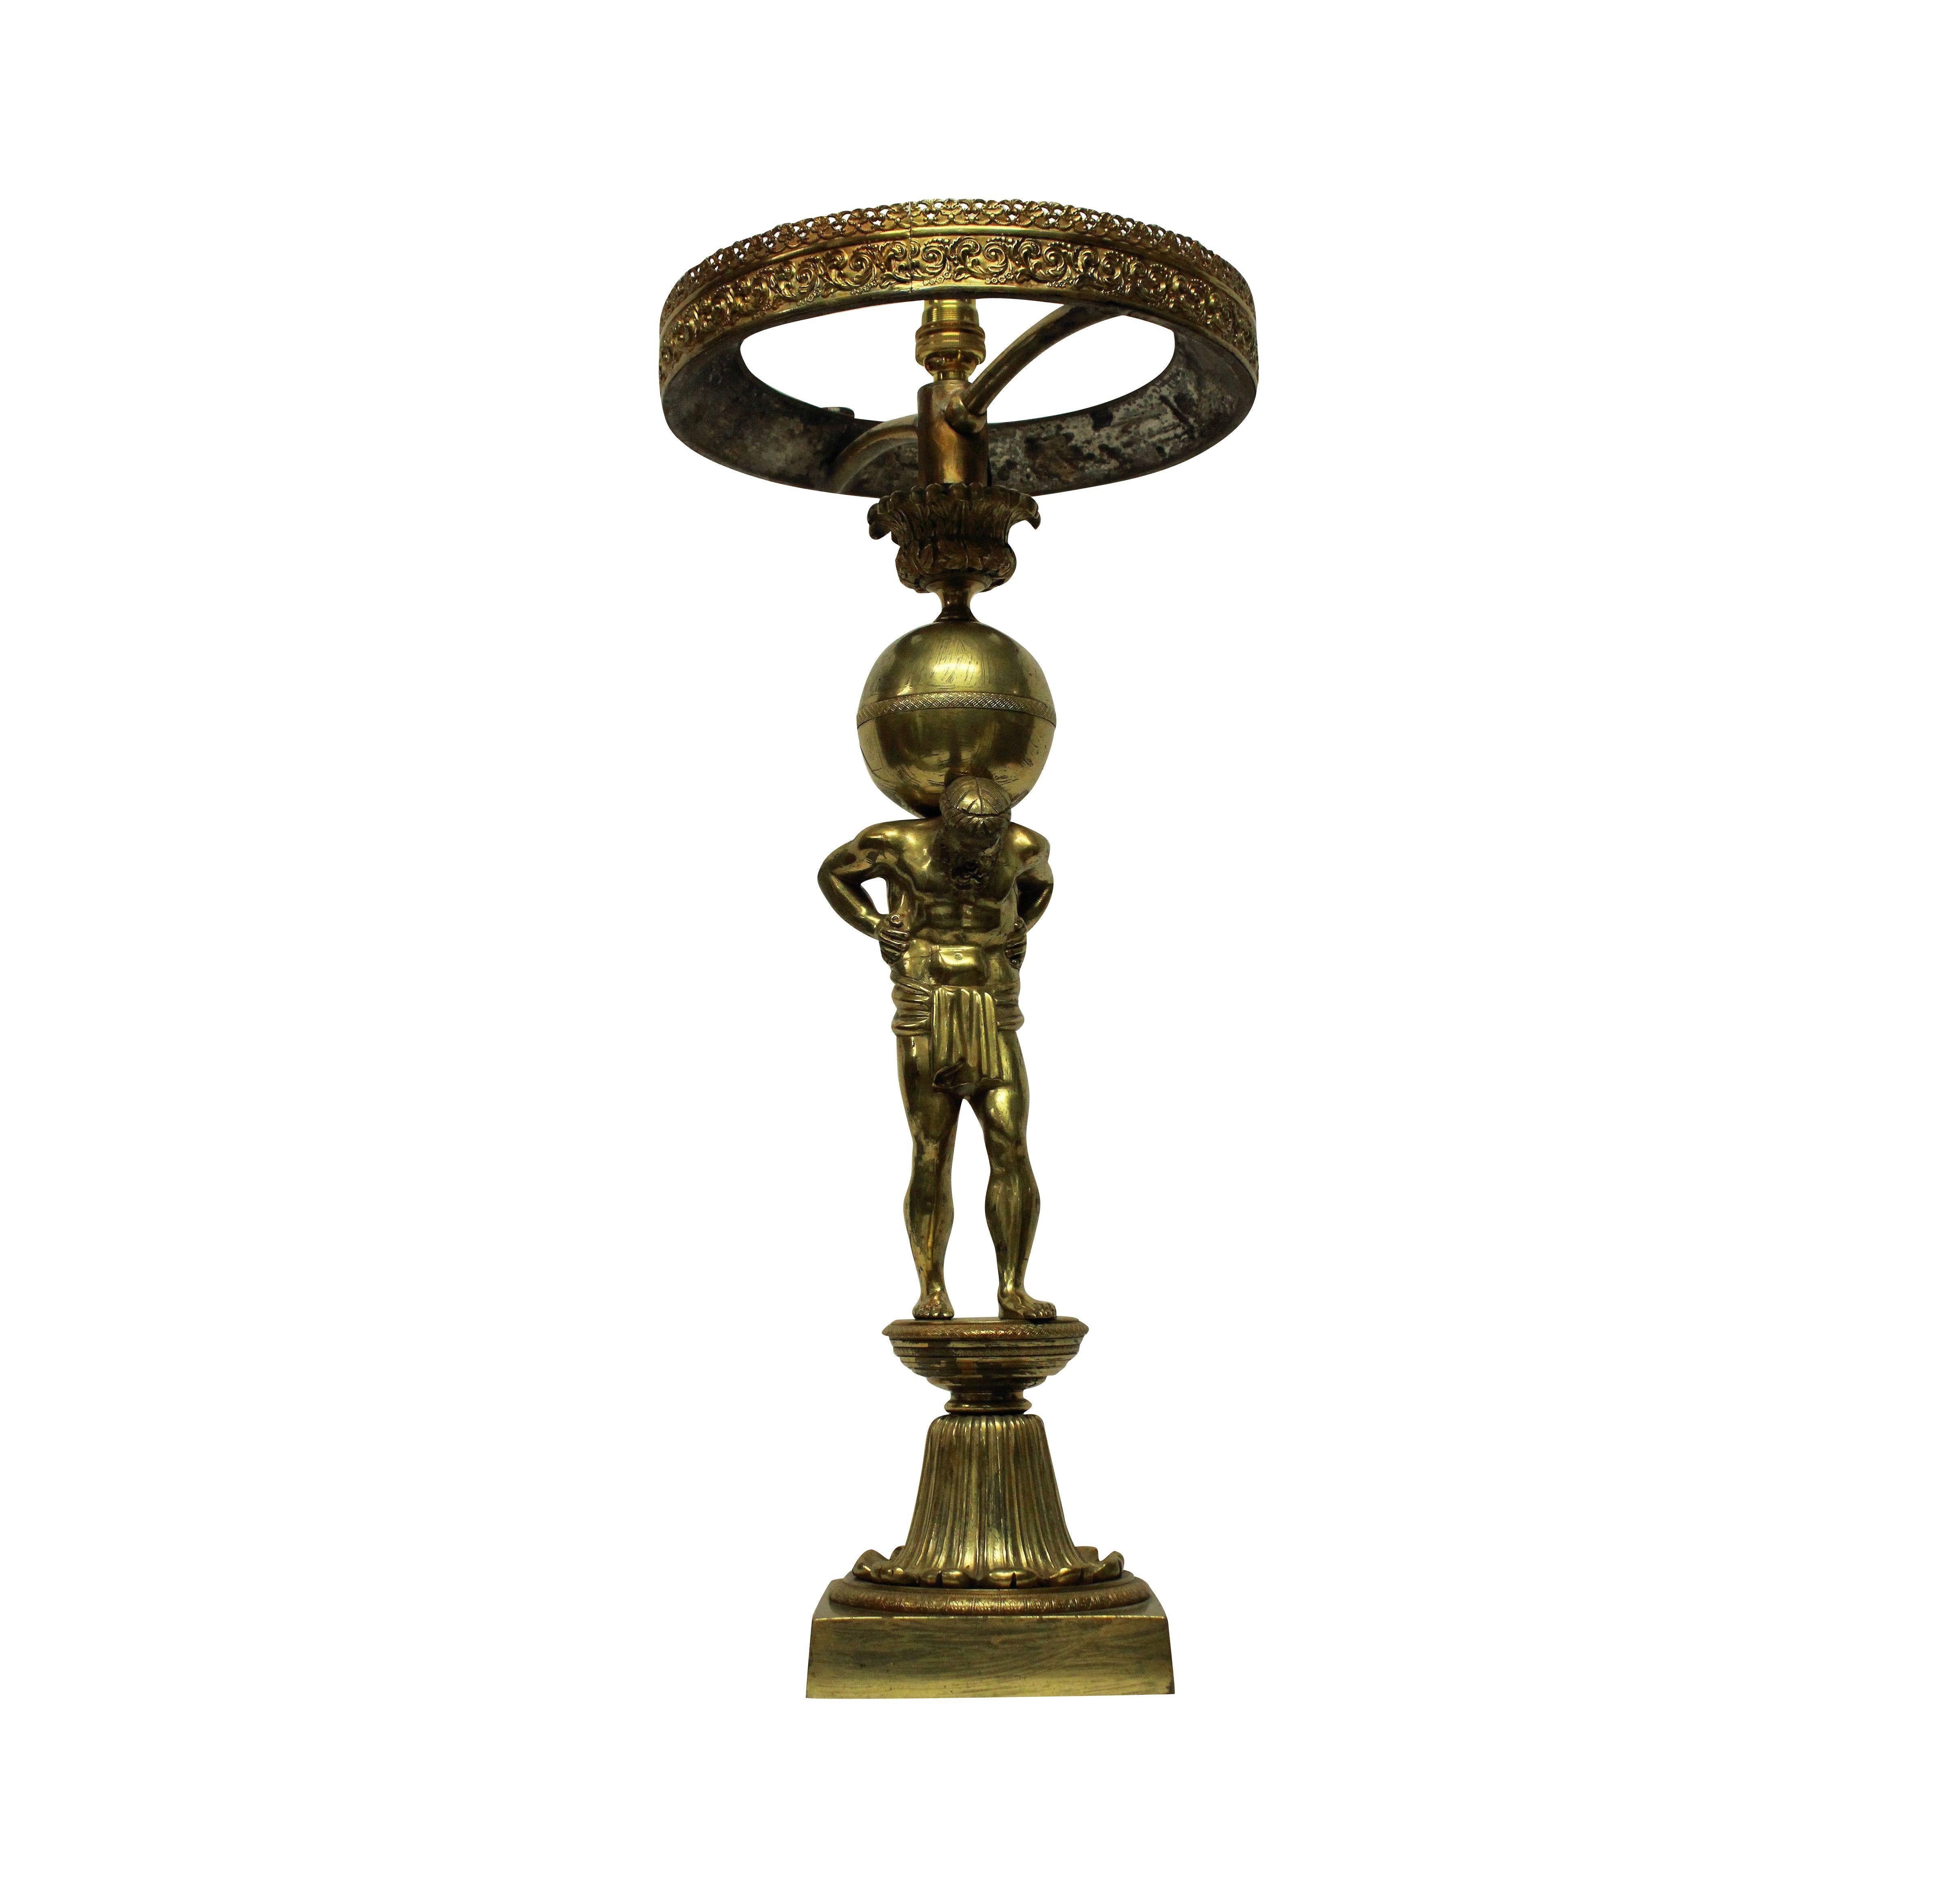 A fine English gilt bronze lamp depicting Atlas, holding up the earth. Formerly for oil, now electrified.